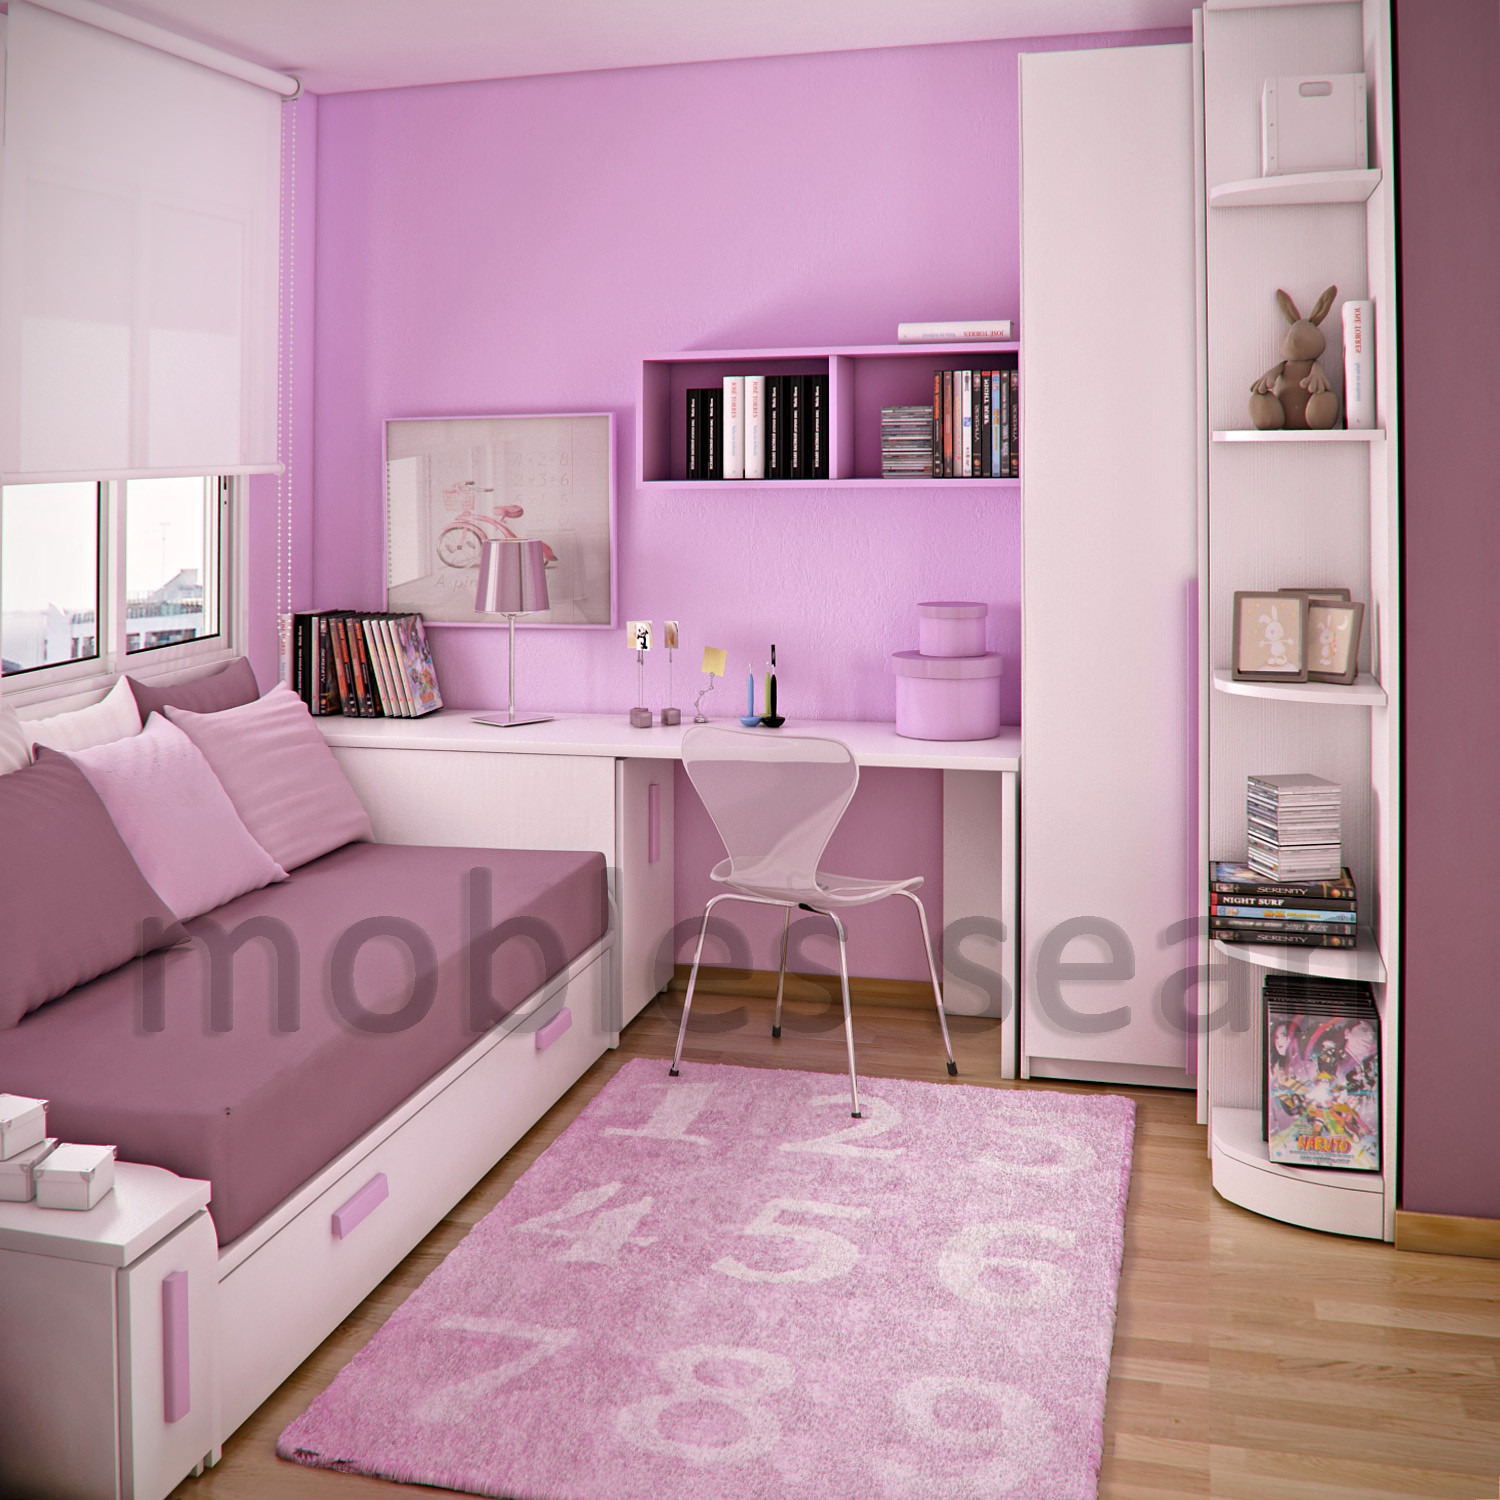 Small Space Bedroom
 Space Saving Designs for Small Kids Rooms